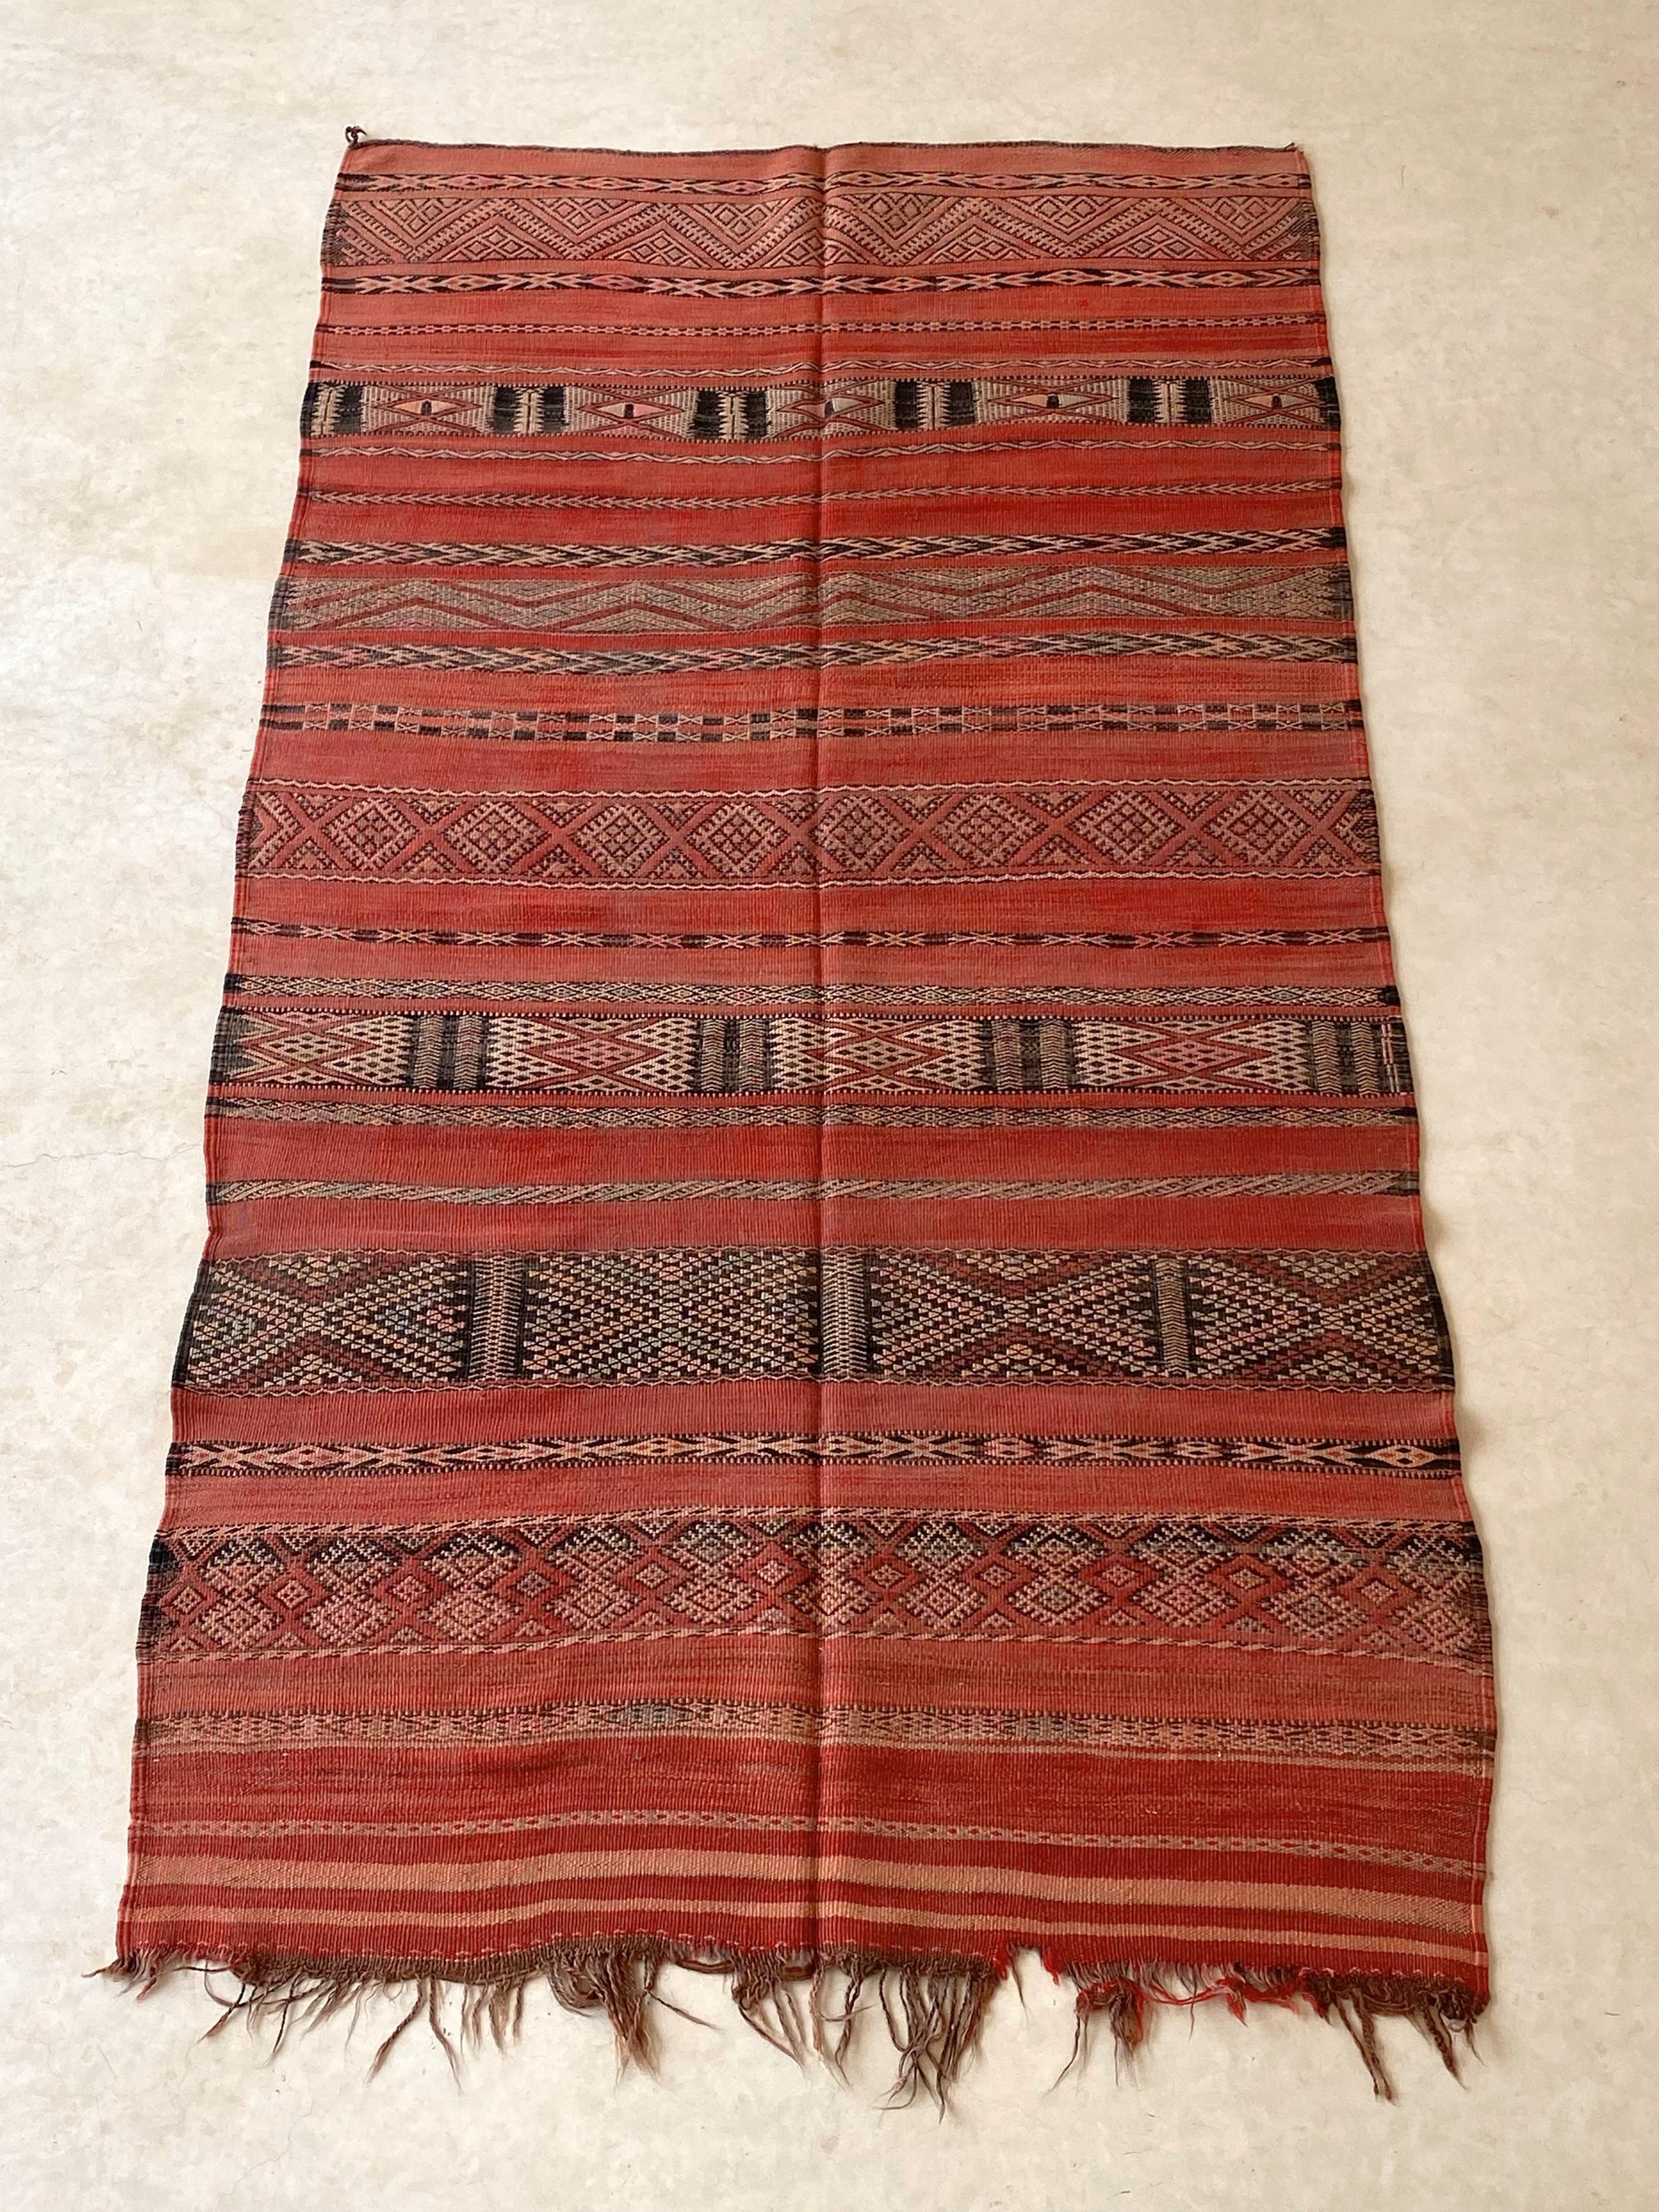 These vibrant, vintage kilim rugs with deep colors show such a strong character! This one here, probably from the Zemmour tribe, shows a classic pattern made of stripes with traditional embroideries. The main color is a red that shows several tones.